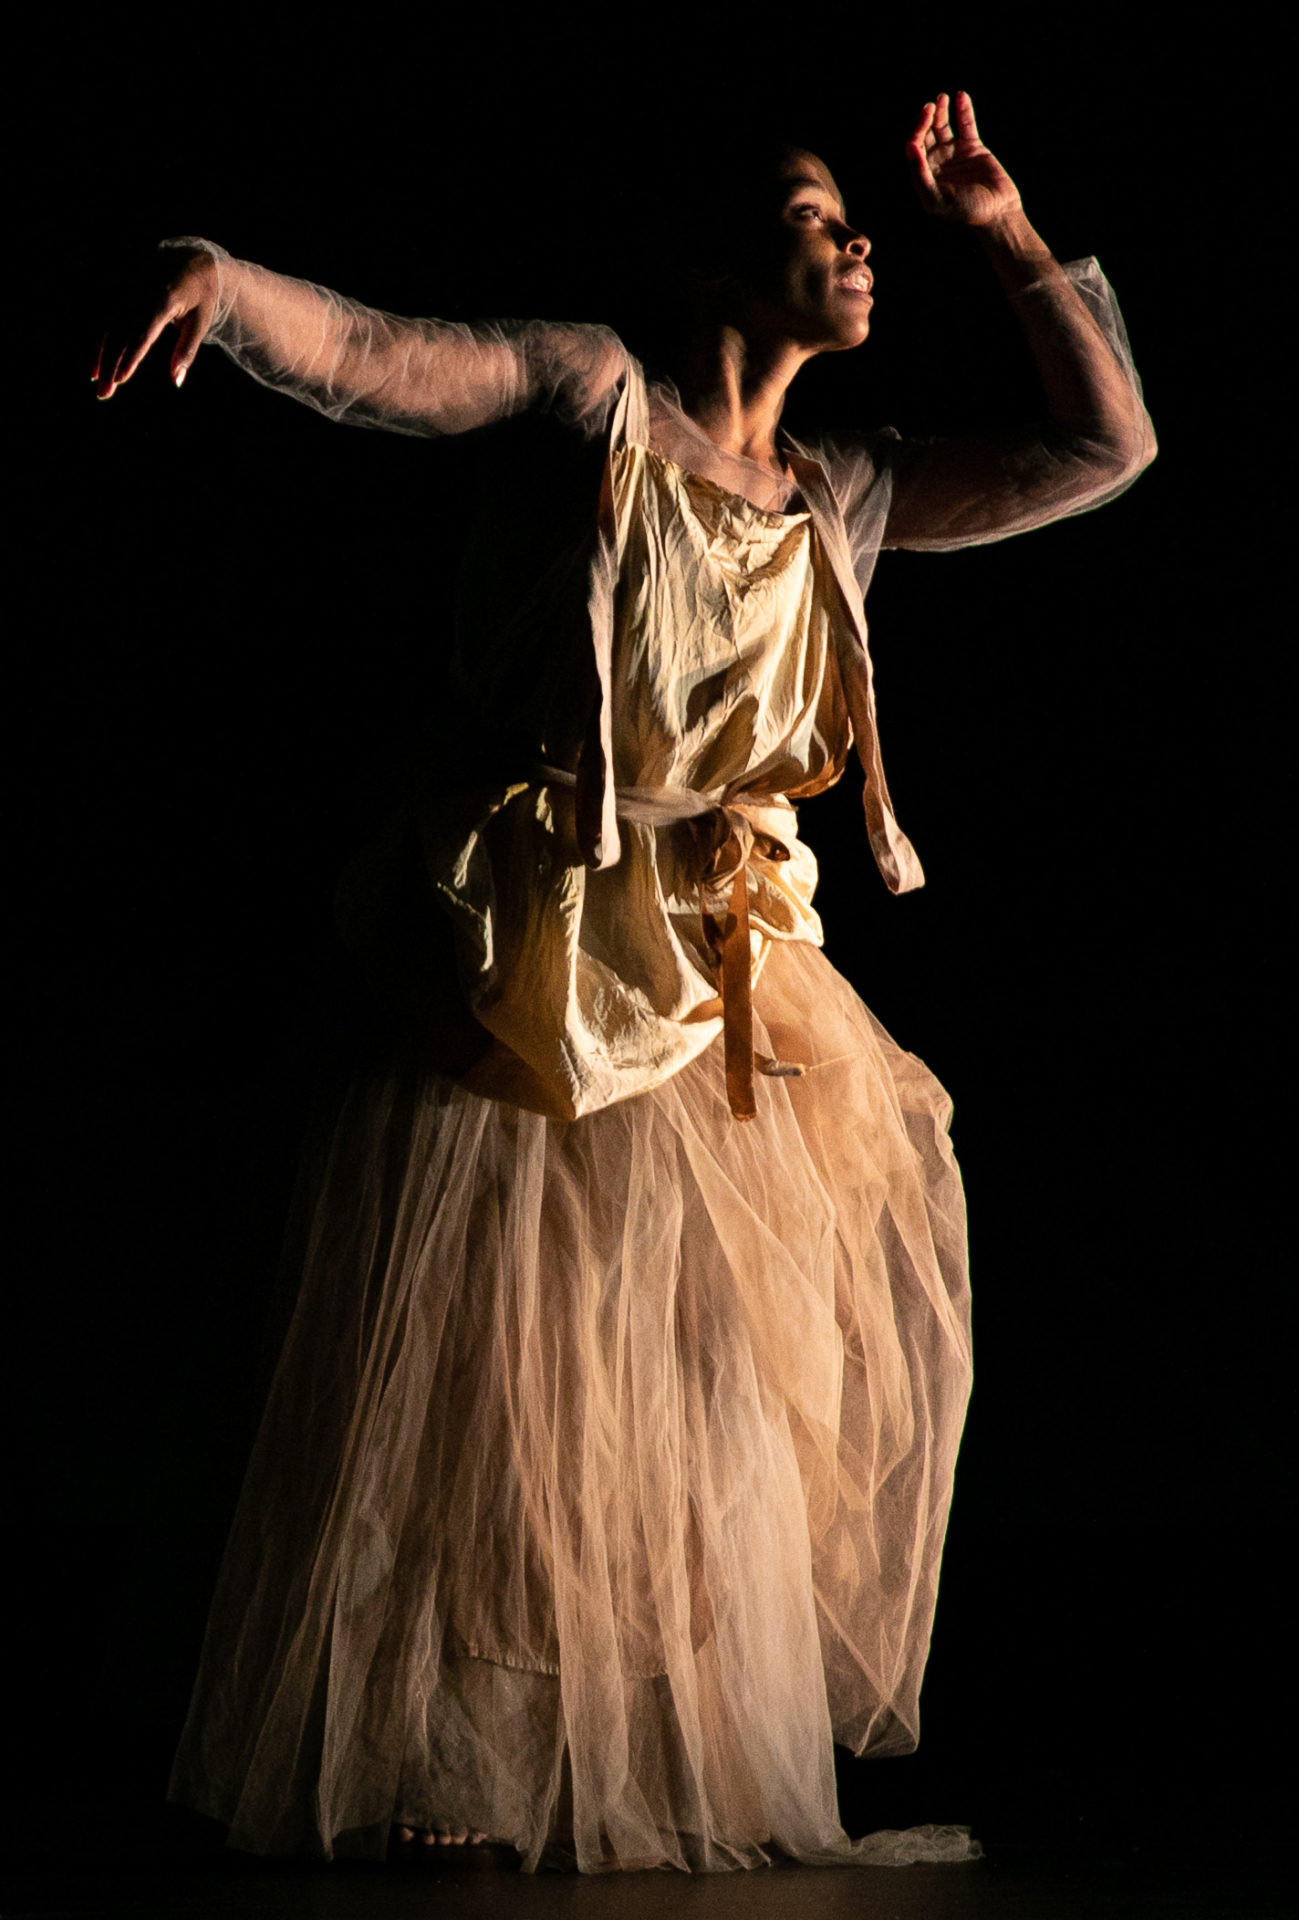 Jasmine Hearn, acclaimed dancer and poet, musician and performance artist, dances with light at Jacob's Pillow Dance Festival. Press photo courtesy of the Pillow